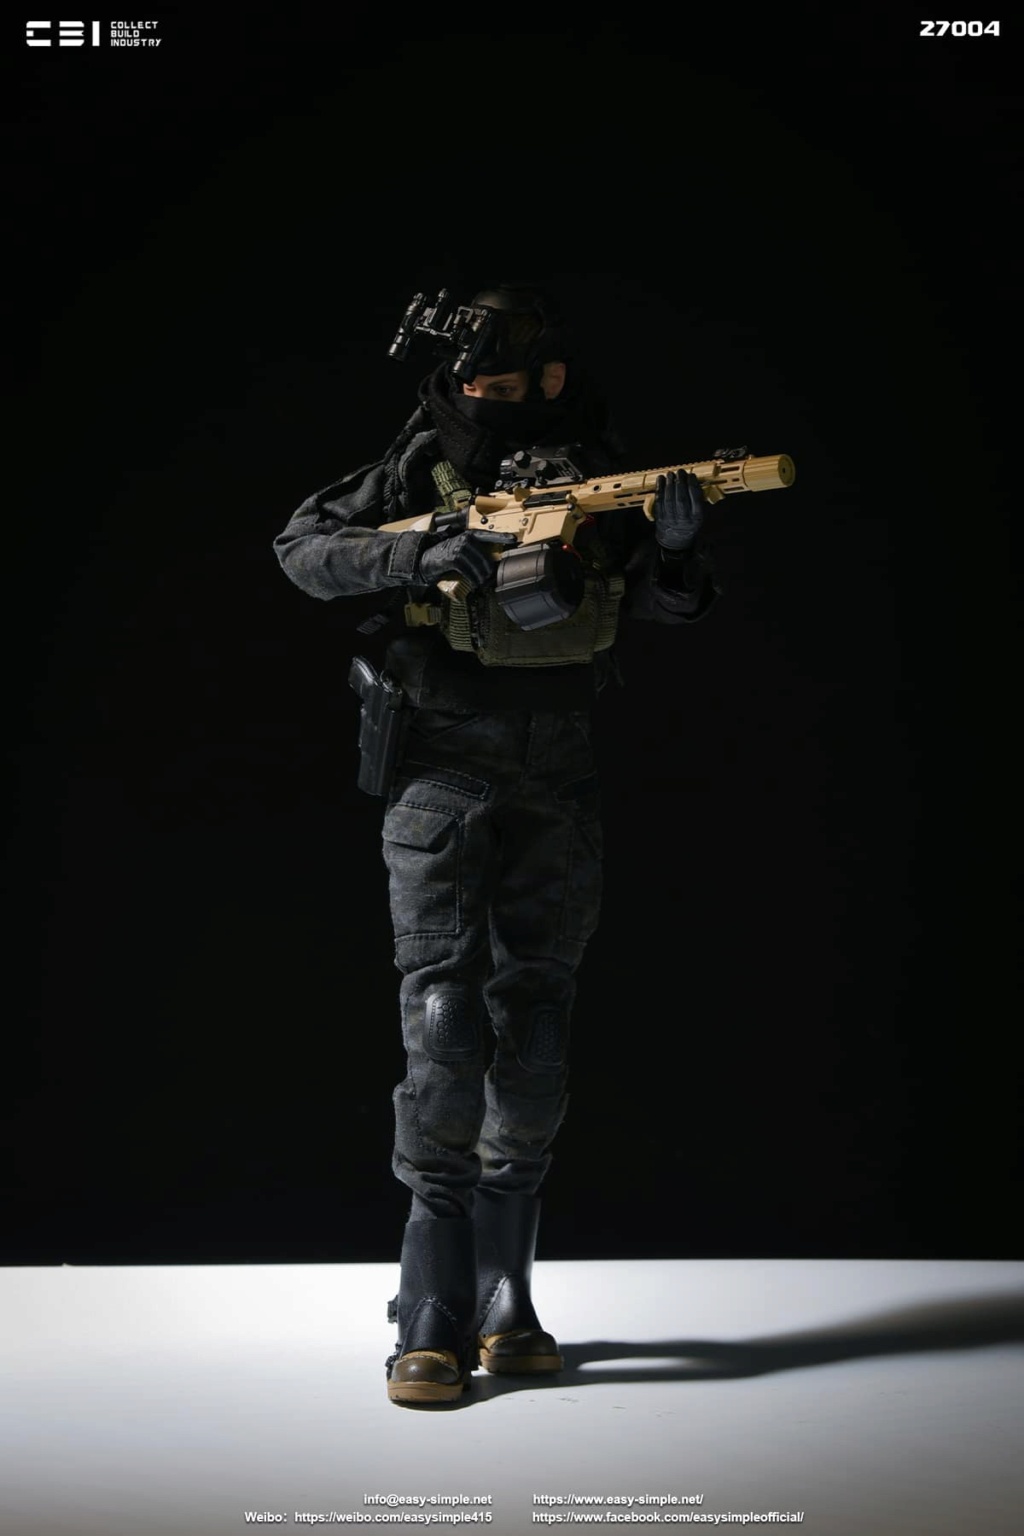 comicbook - NEW PRODUCT: CBI & Easy&Simple: 27004 1/6 ERICA STORM - TASK FORCE 58 CPO action figure 3770